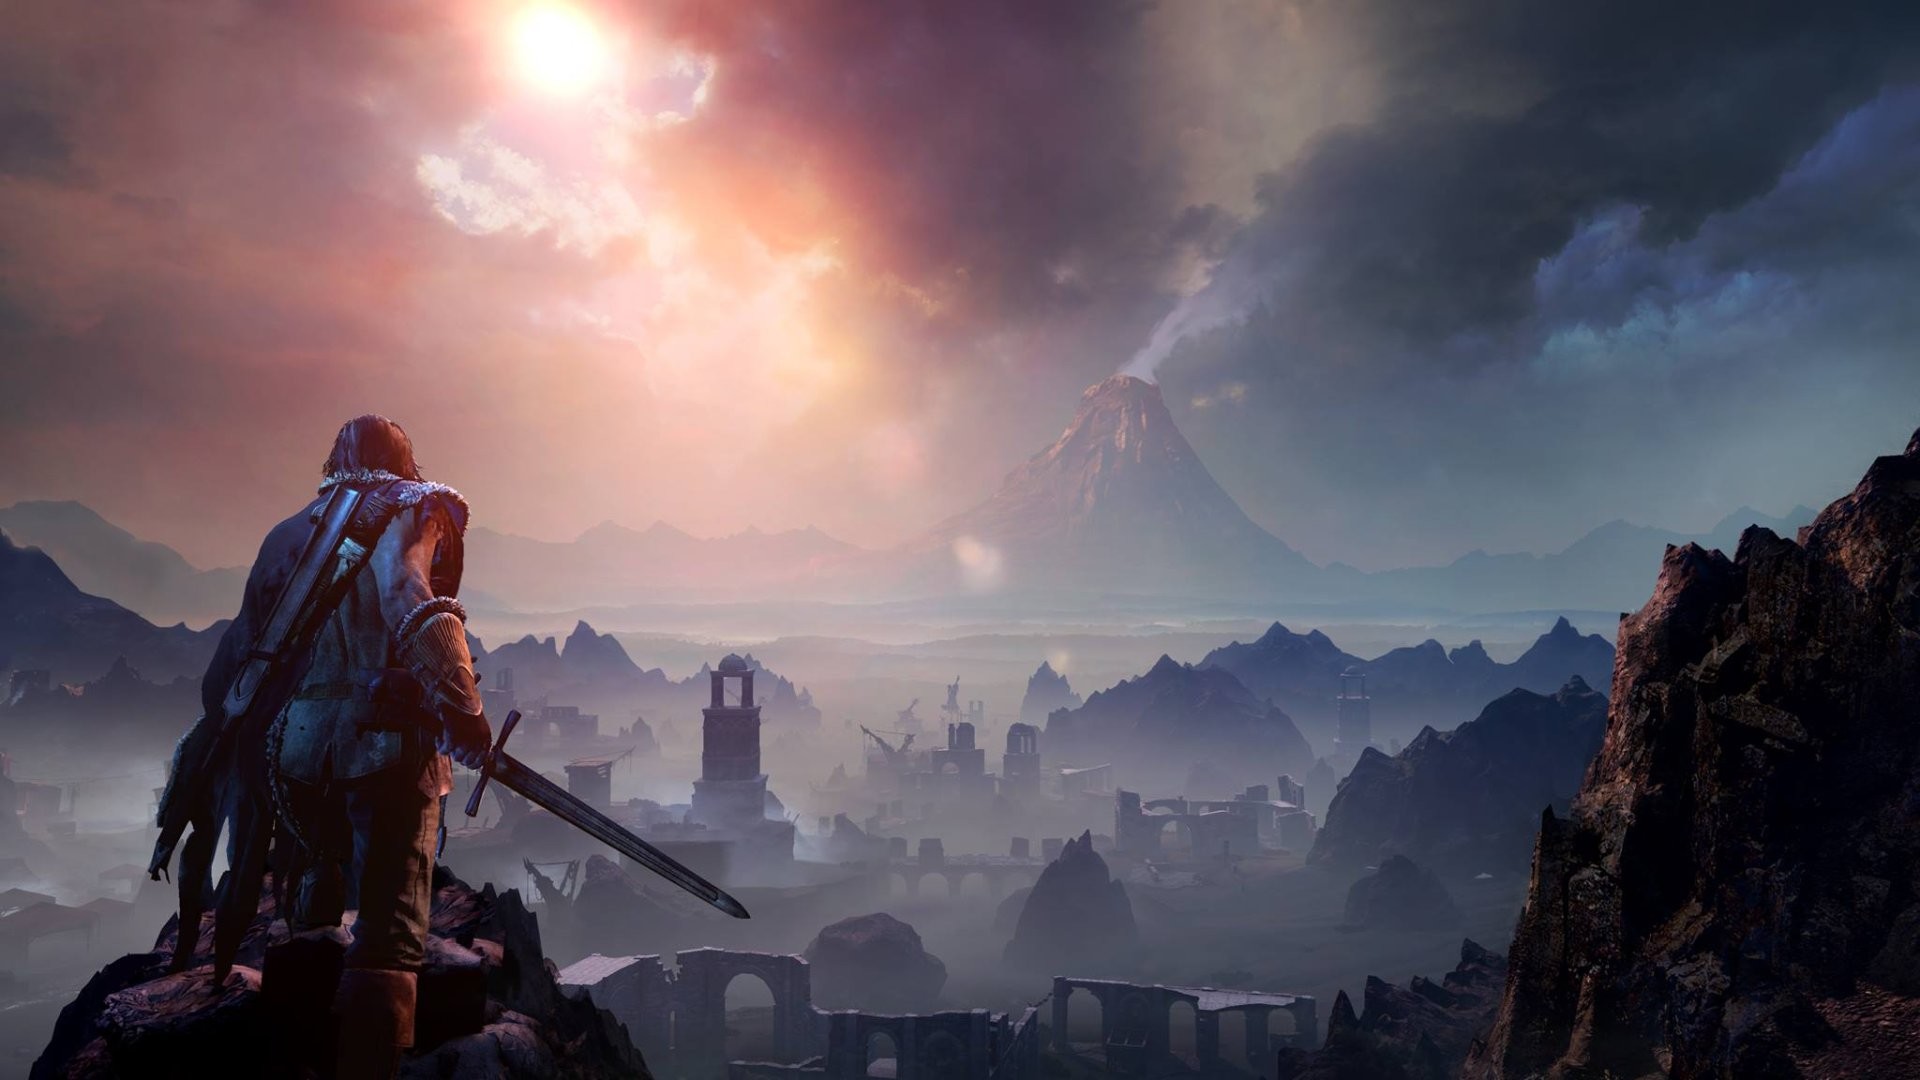 1920x1080 Middle-earth: Shadow of Mordor is coming soon